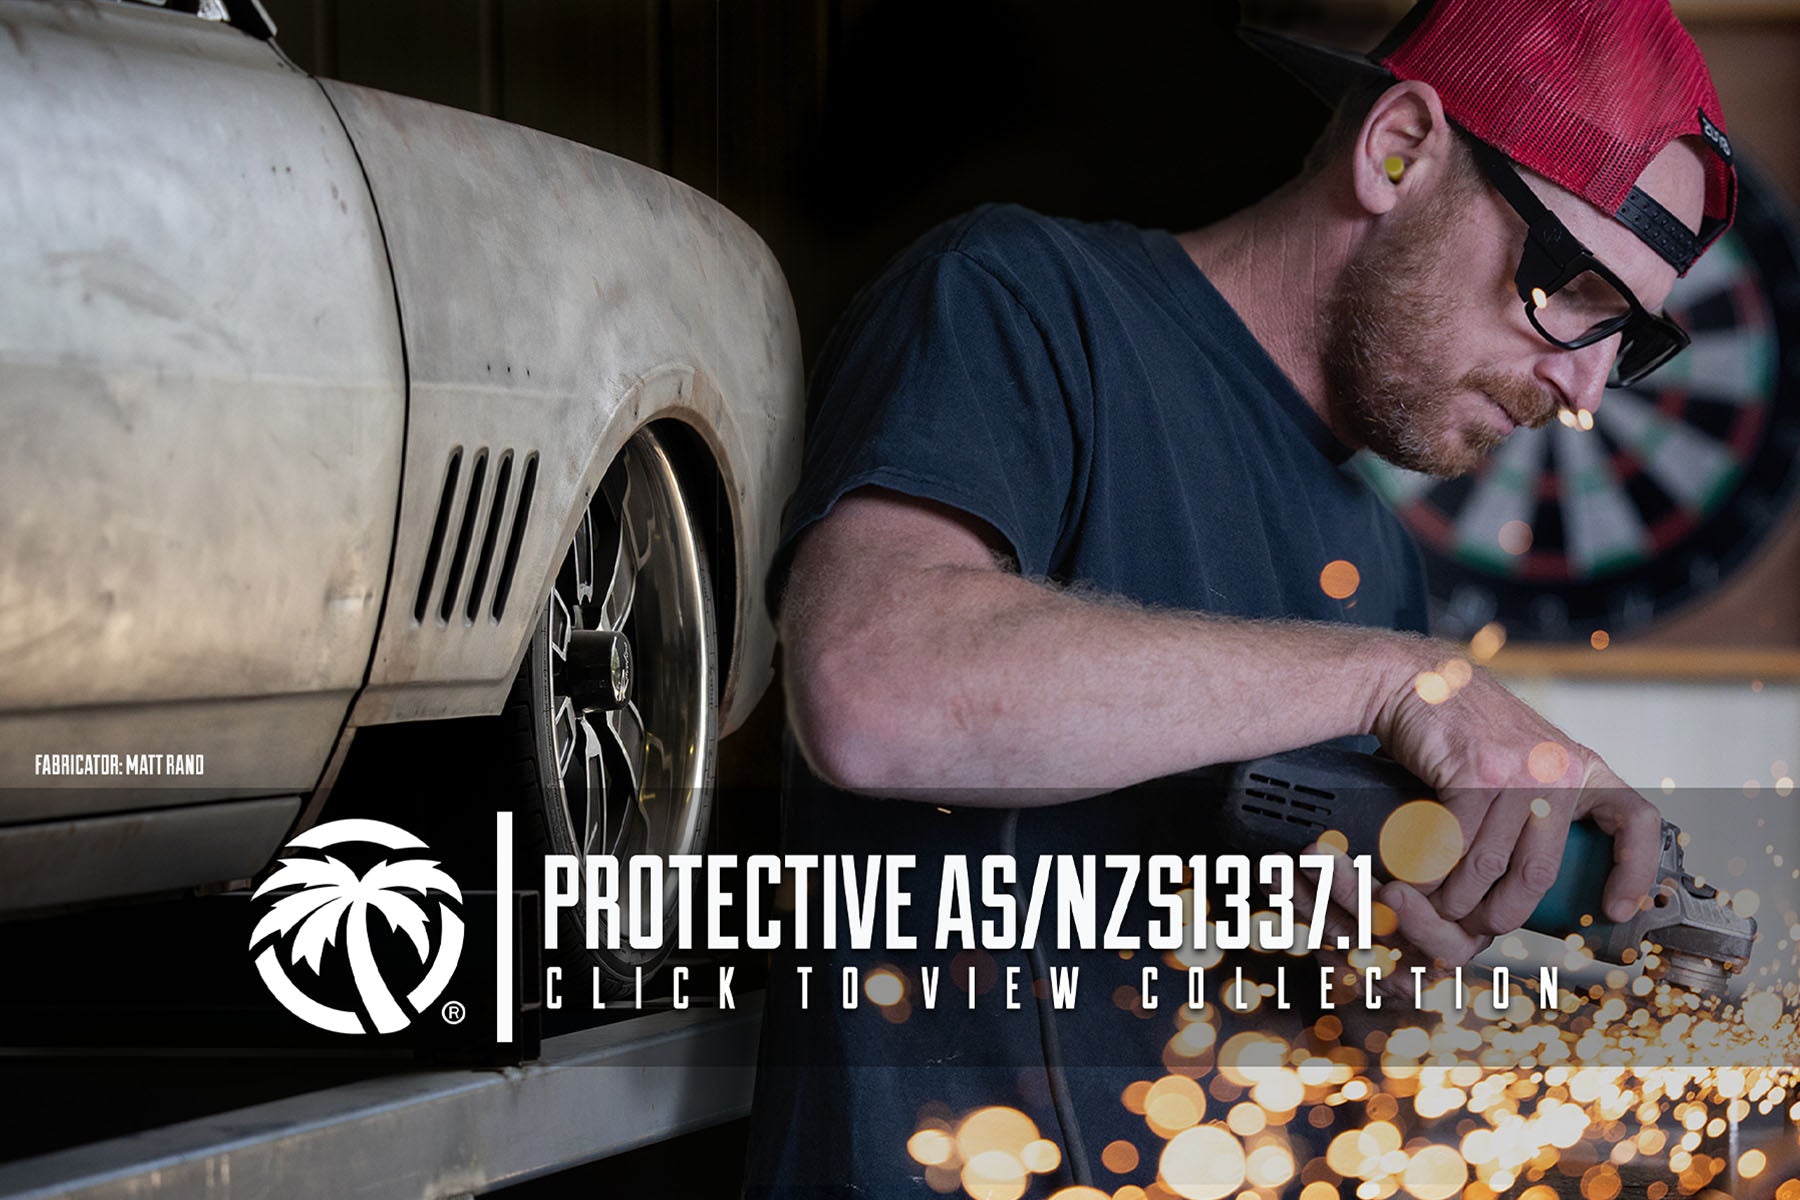 Heat Wave Visual Australia. Shop Protective Safety Glasses AS/NZS1337.1 Approved. Ultimate Style Performance and Protection Like No other. Free Same Day Shipping